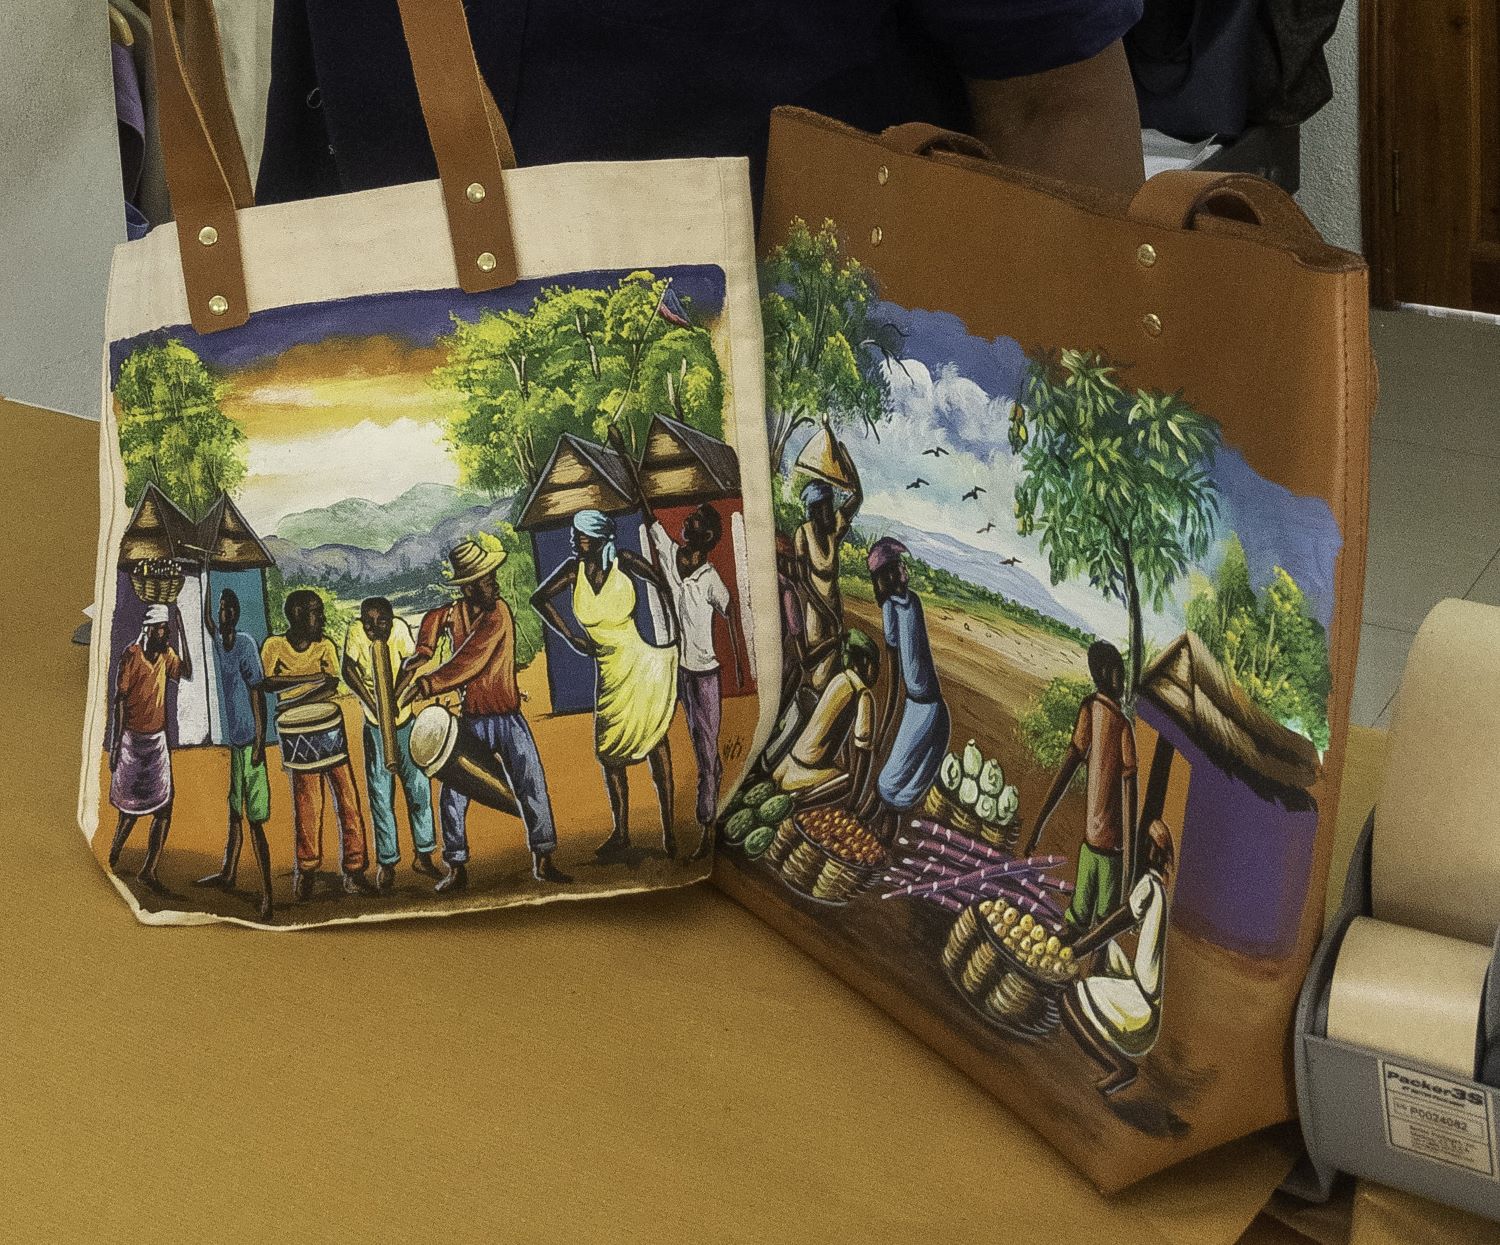 TISAKSUK, “MADE IN HAITI” TAKES THE MARKET BY STORM